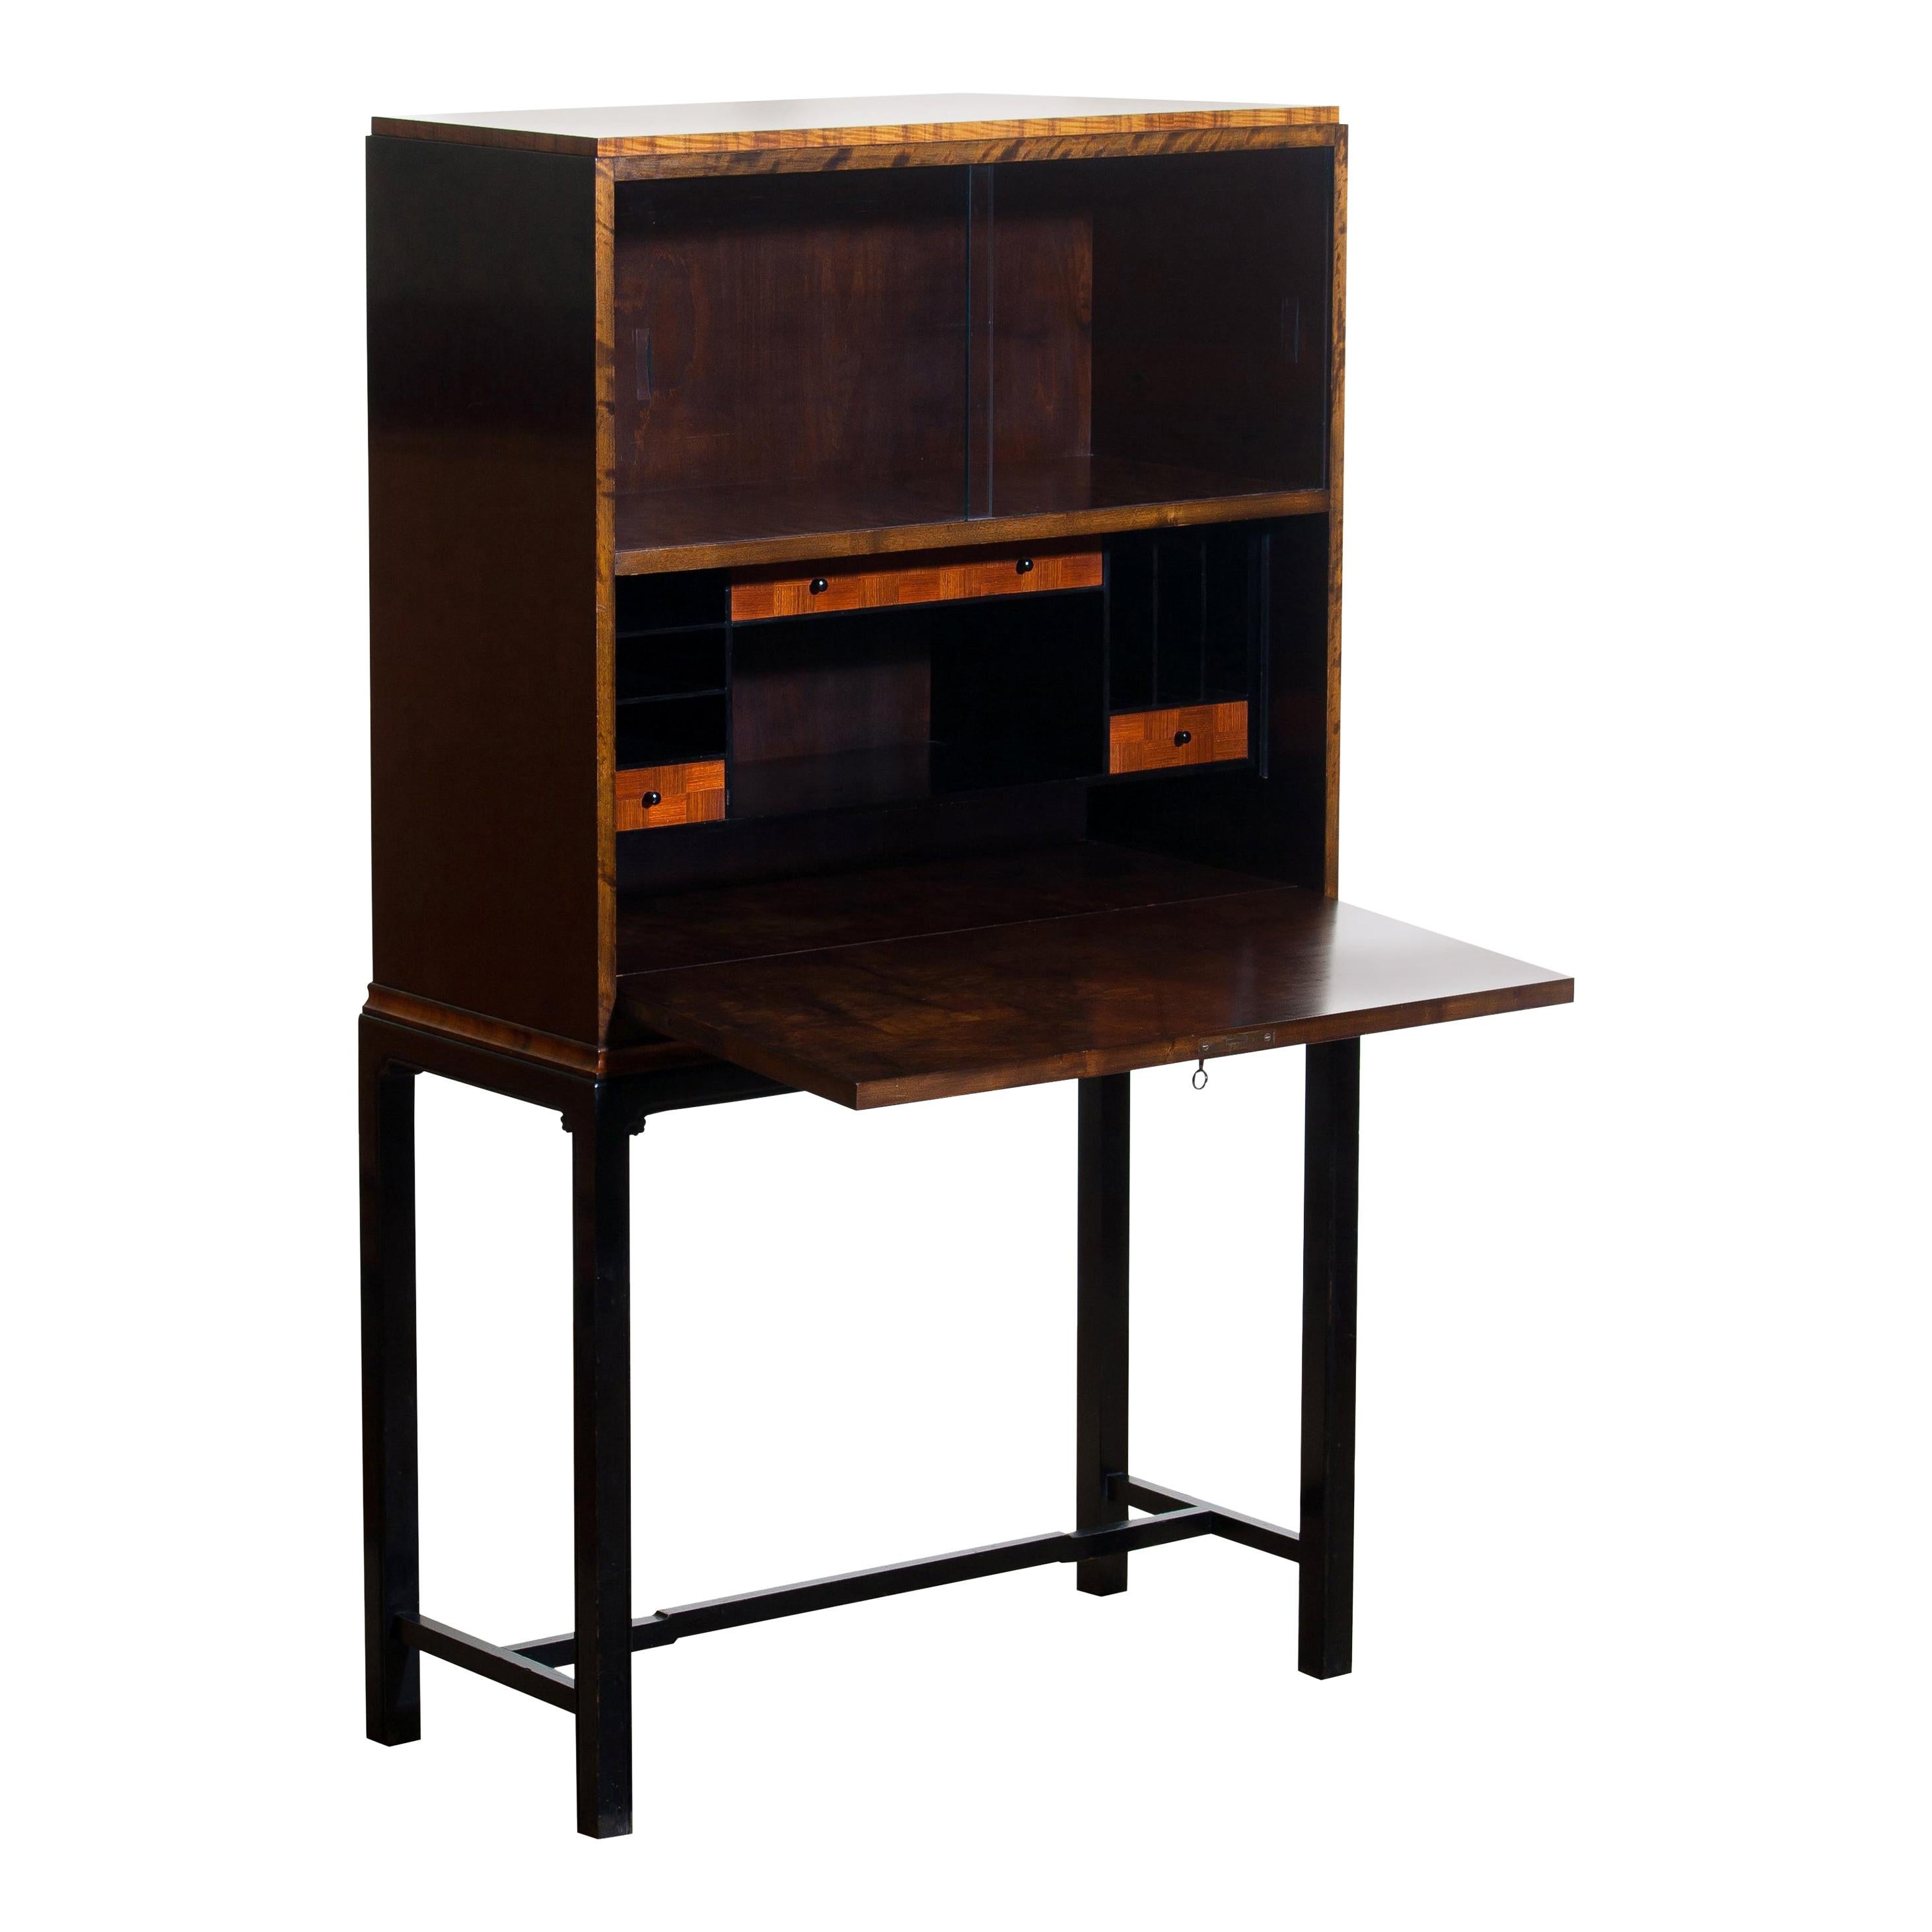 1920s, unique secretaire designed by Axel Einar Hjorth and manufactured in 1924 by Nordiska Kompaniet, numbered L228.
This unique Art Deco secretaire is designed as an come-in to the USA for Nordiska Kompaniet.

The secretaire is veneered with